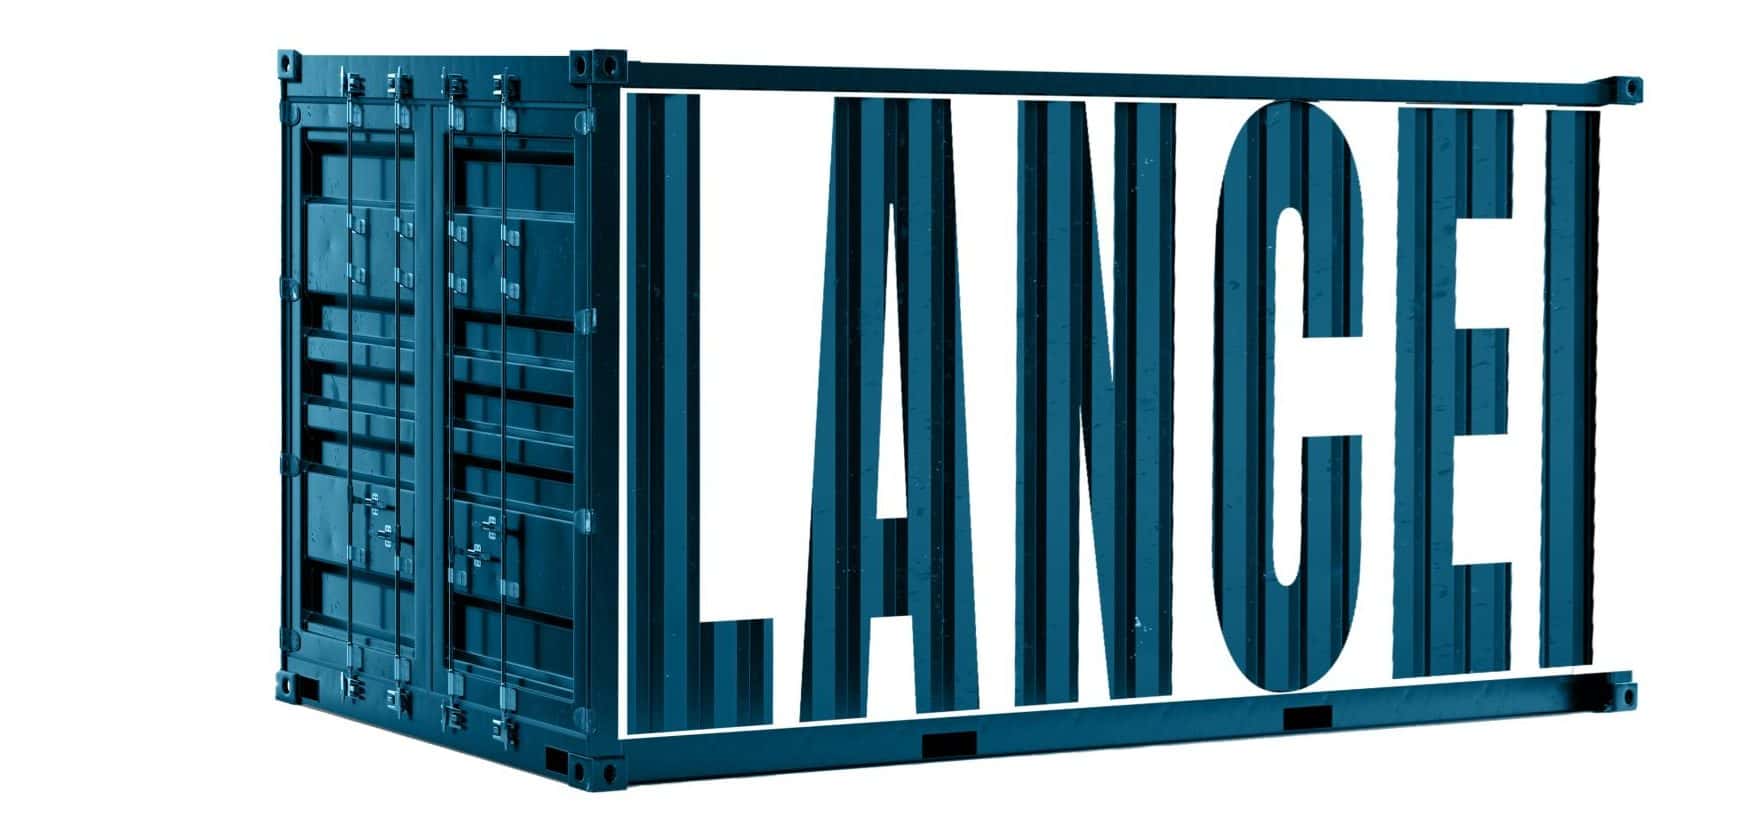 Lancei Containers, containers de qualidade.